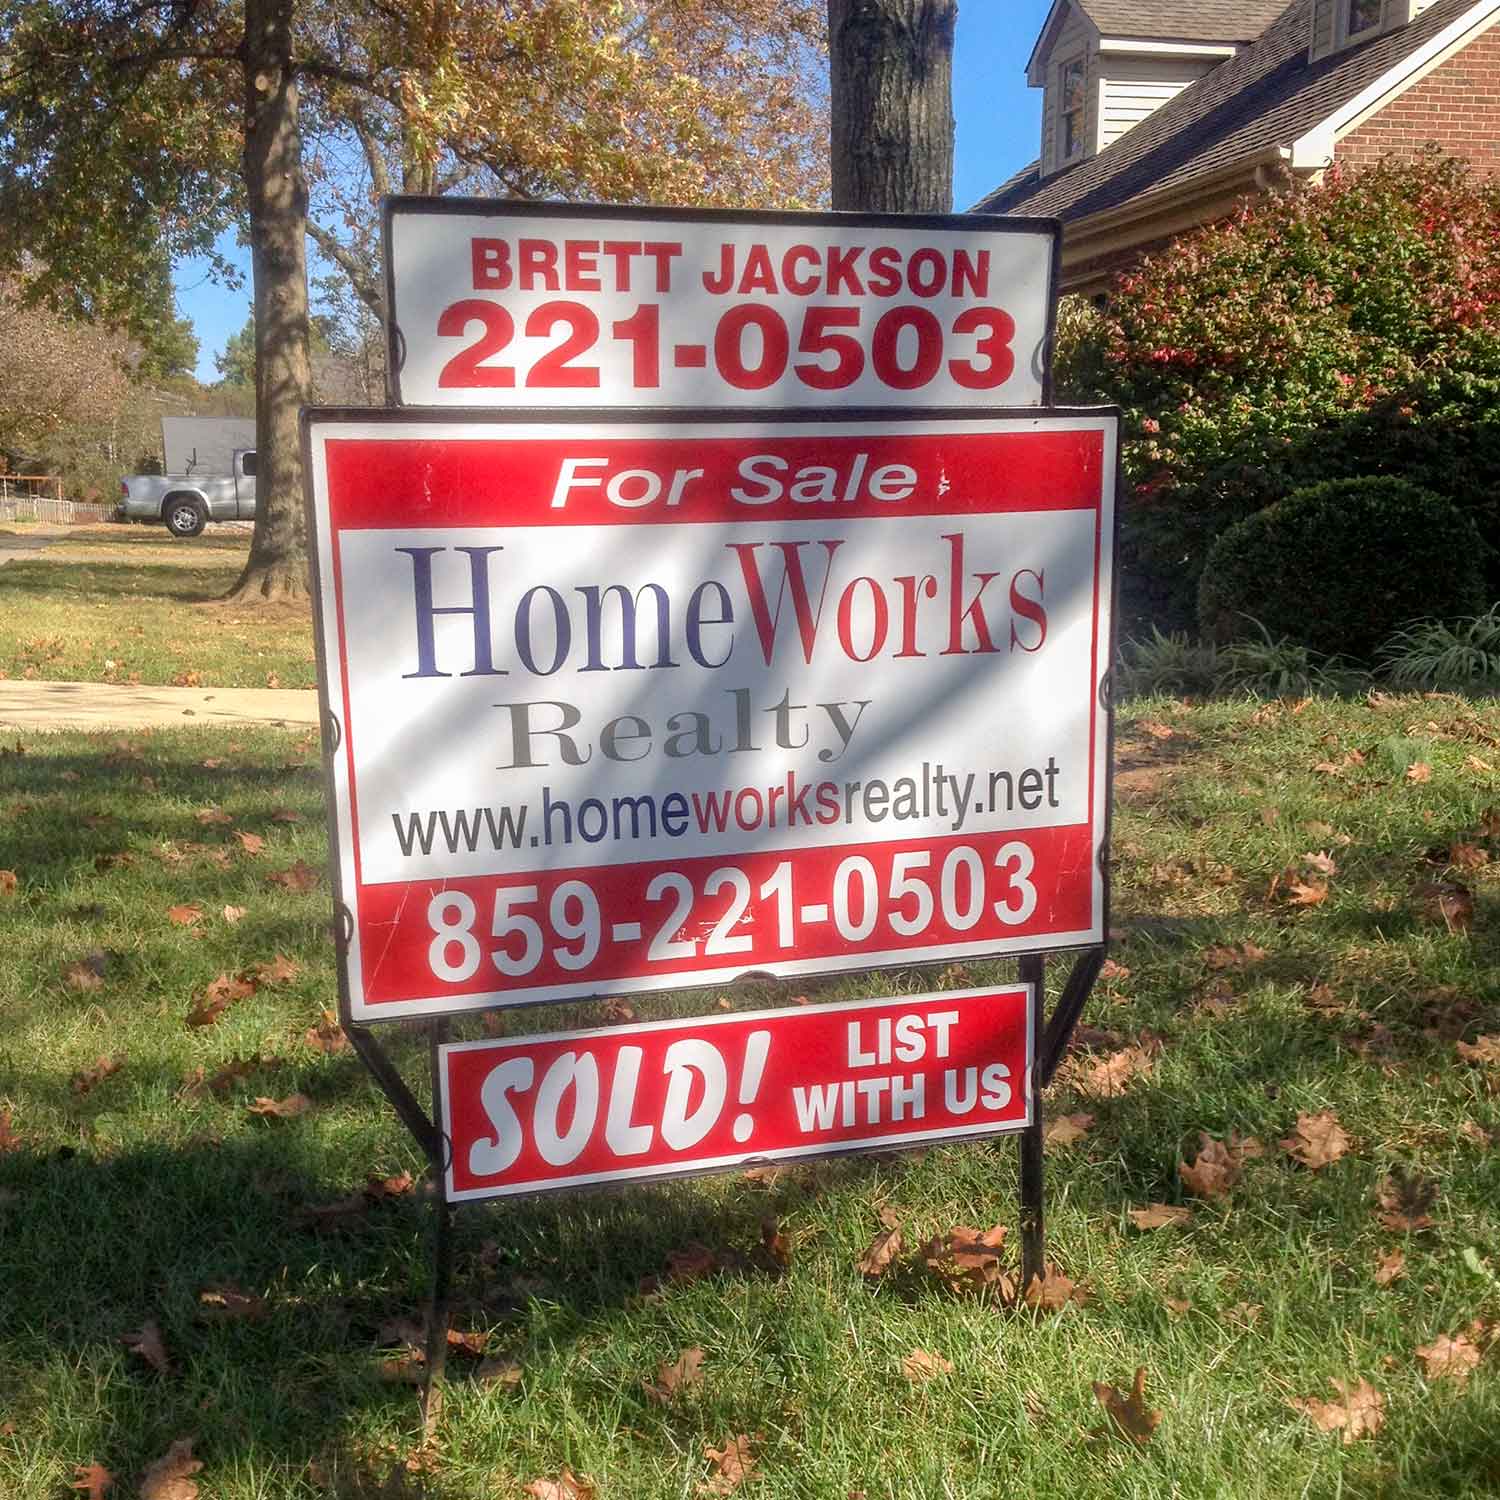 homeworks realty south bend